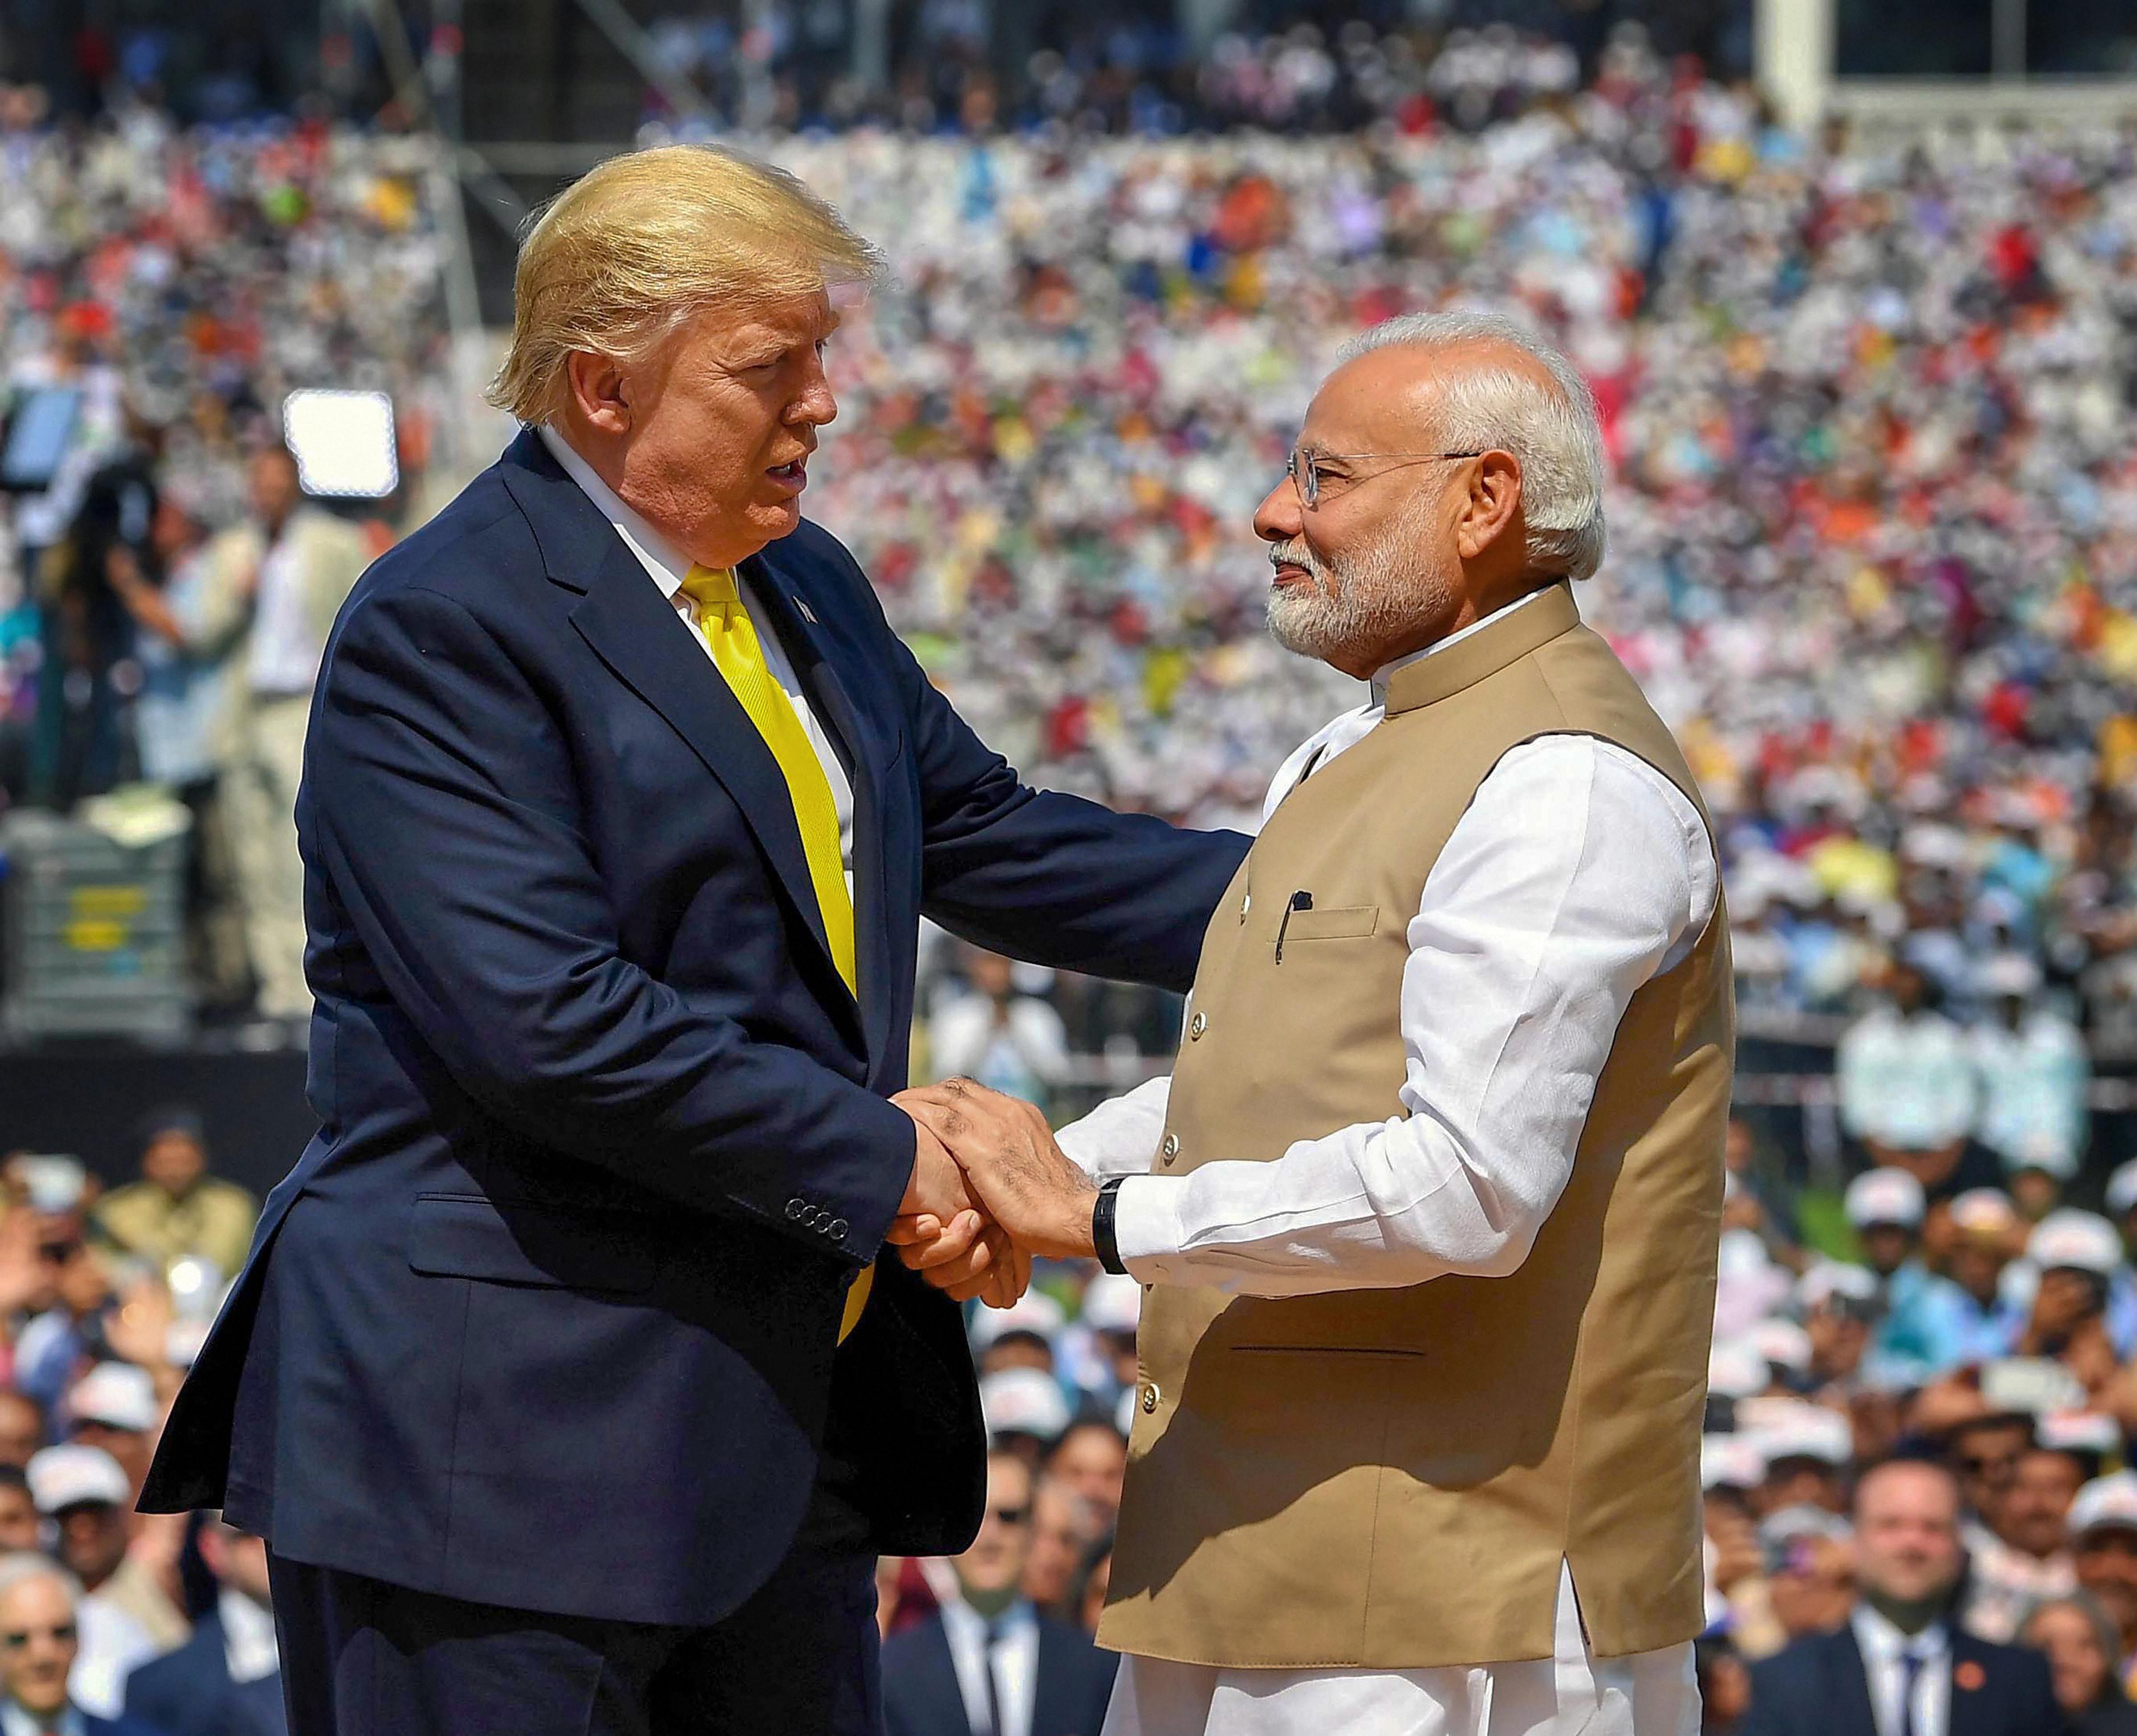 US President Donald Trump and Indian PM Narendra Modi greet each other. (Credit: PTI)